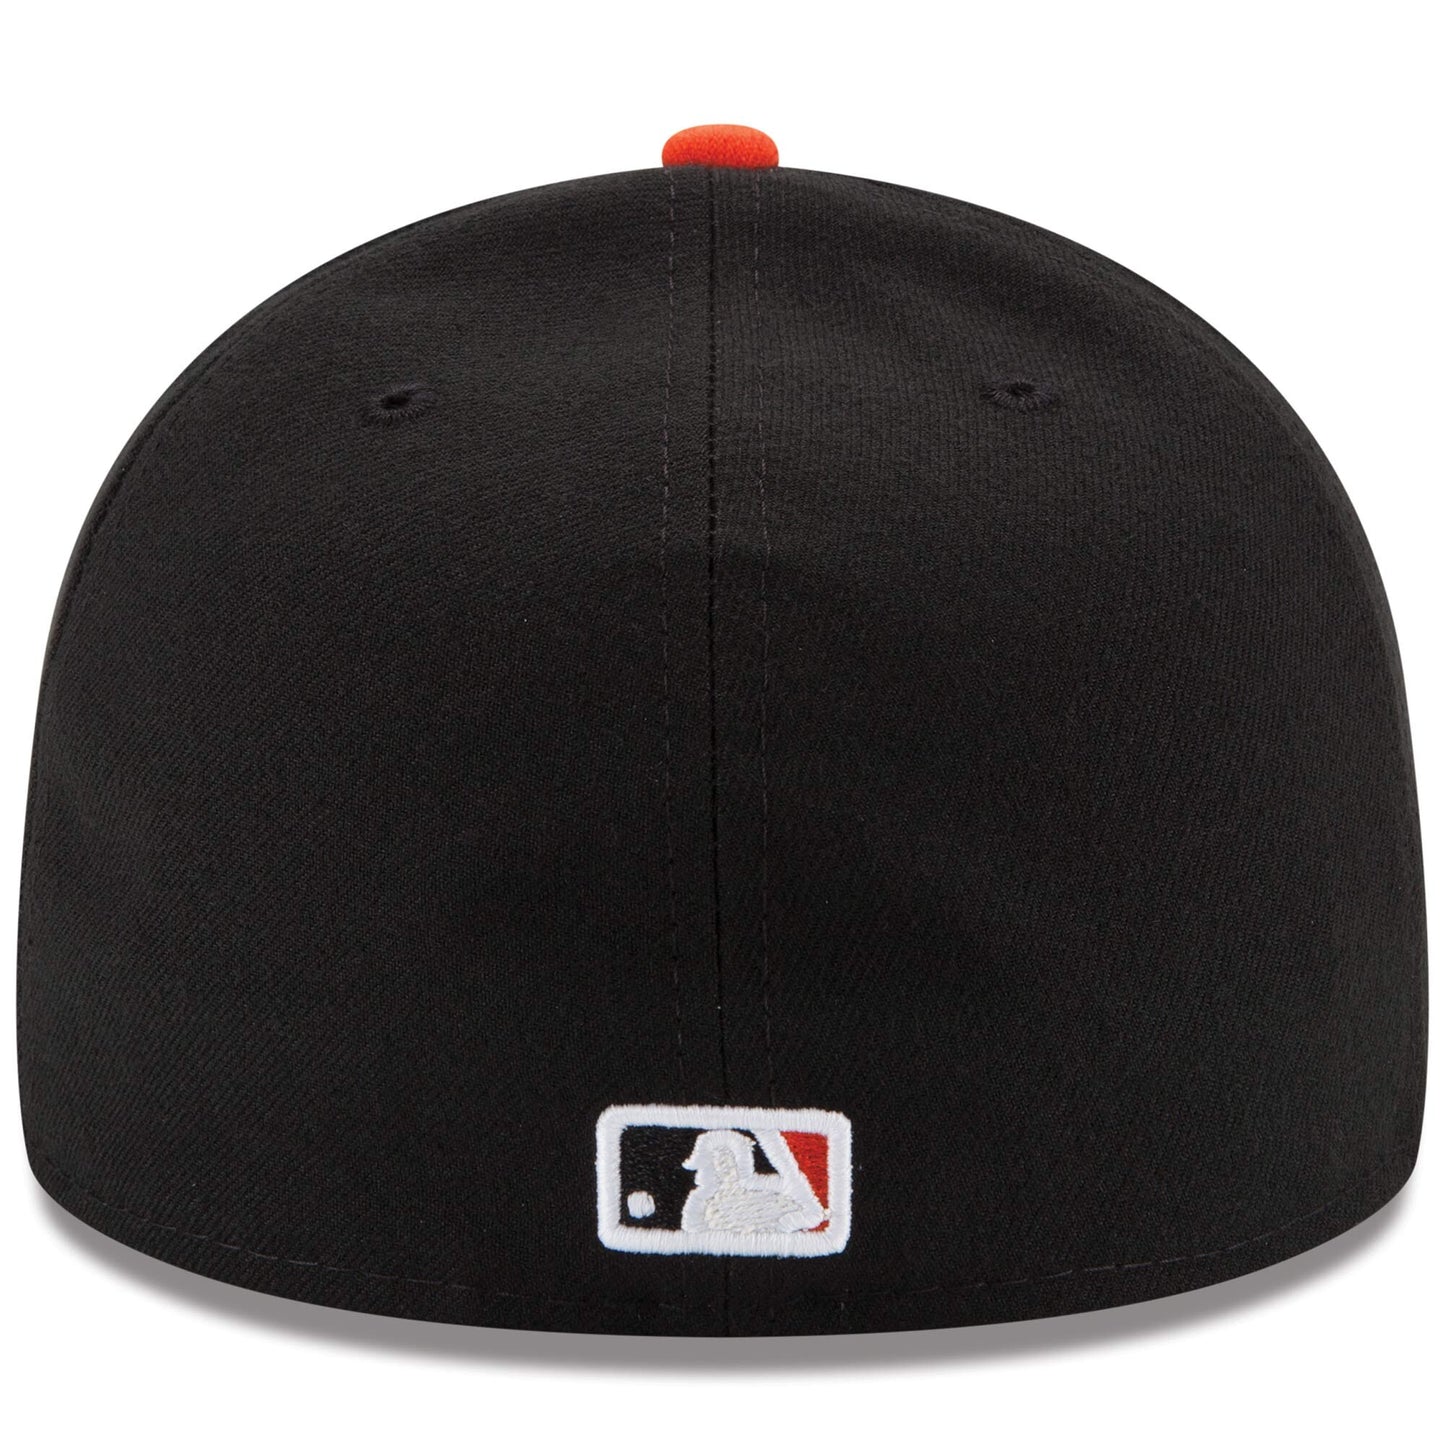 Men's Baltimore Orioles New Era Black/Orange Alternate Authentic Collection On Field 59FIFTY Performance Fitted Hat